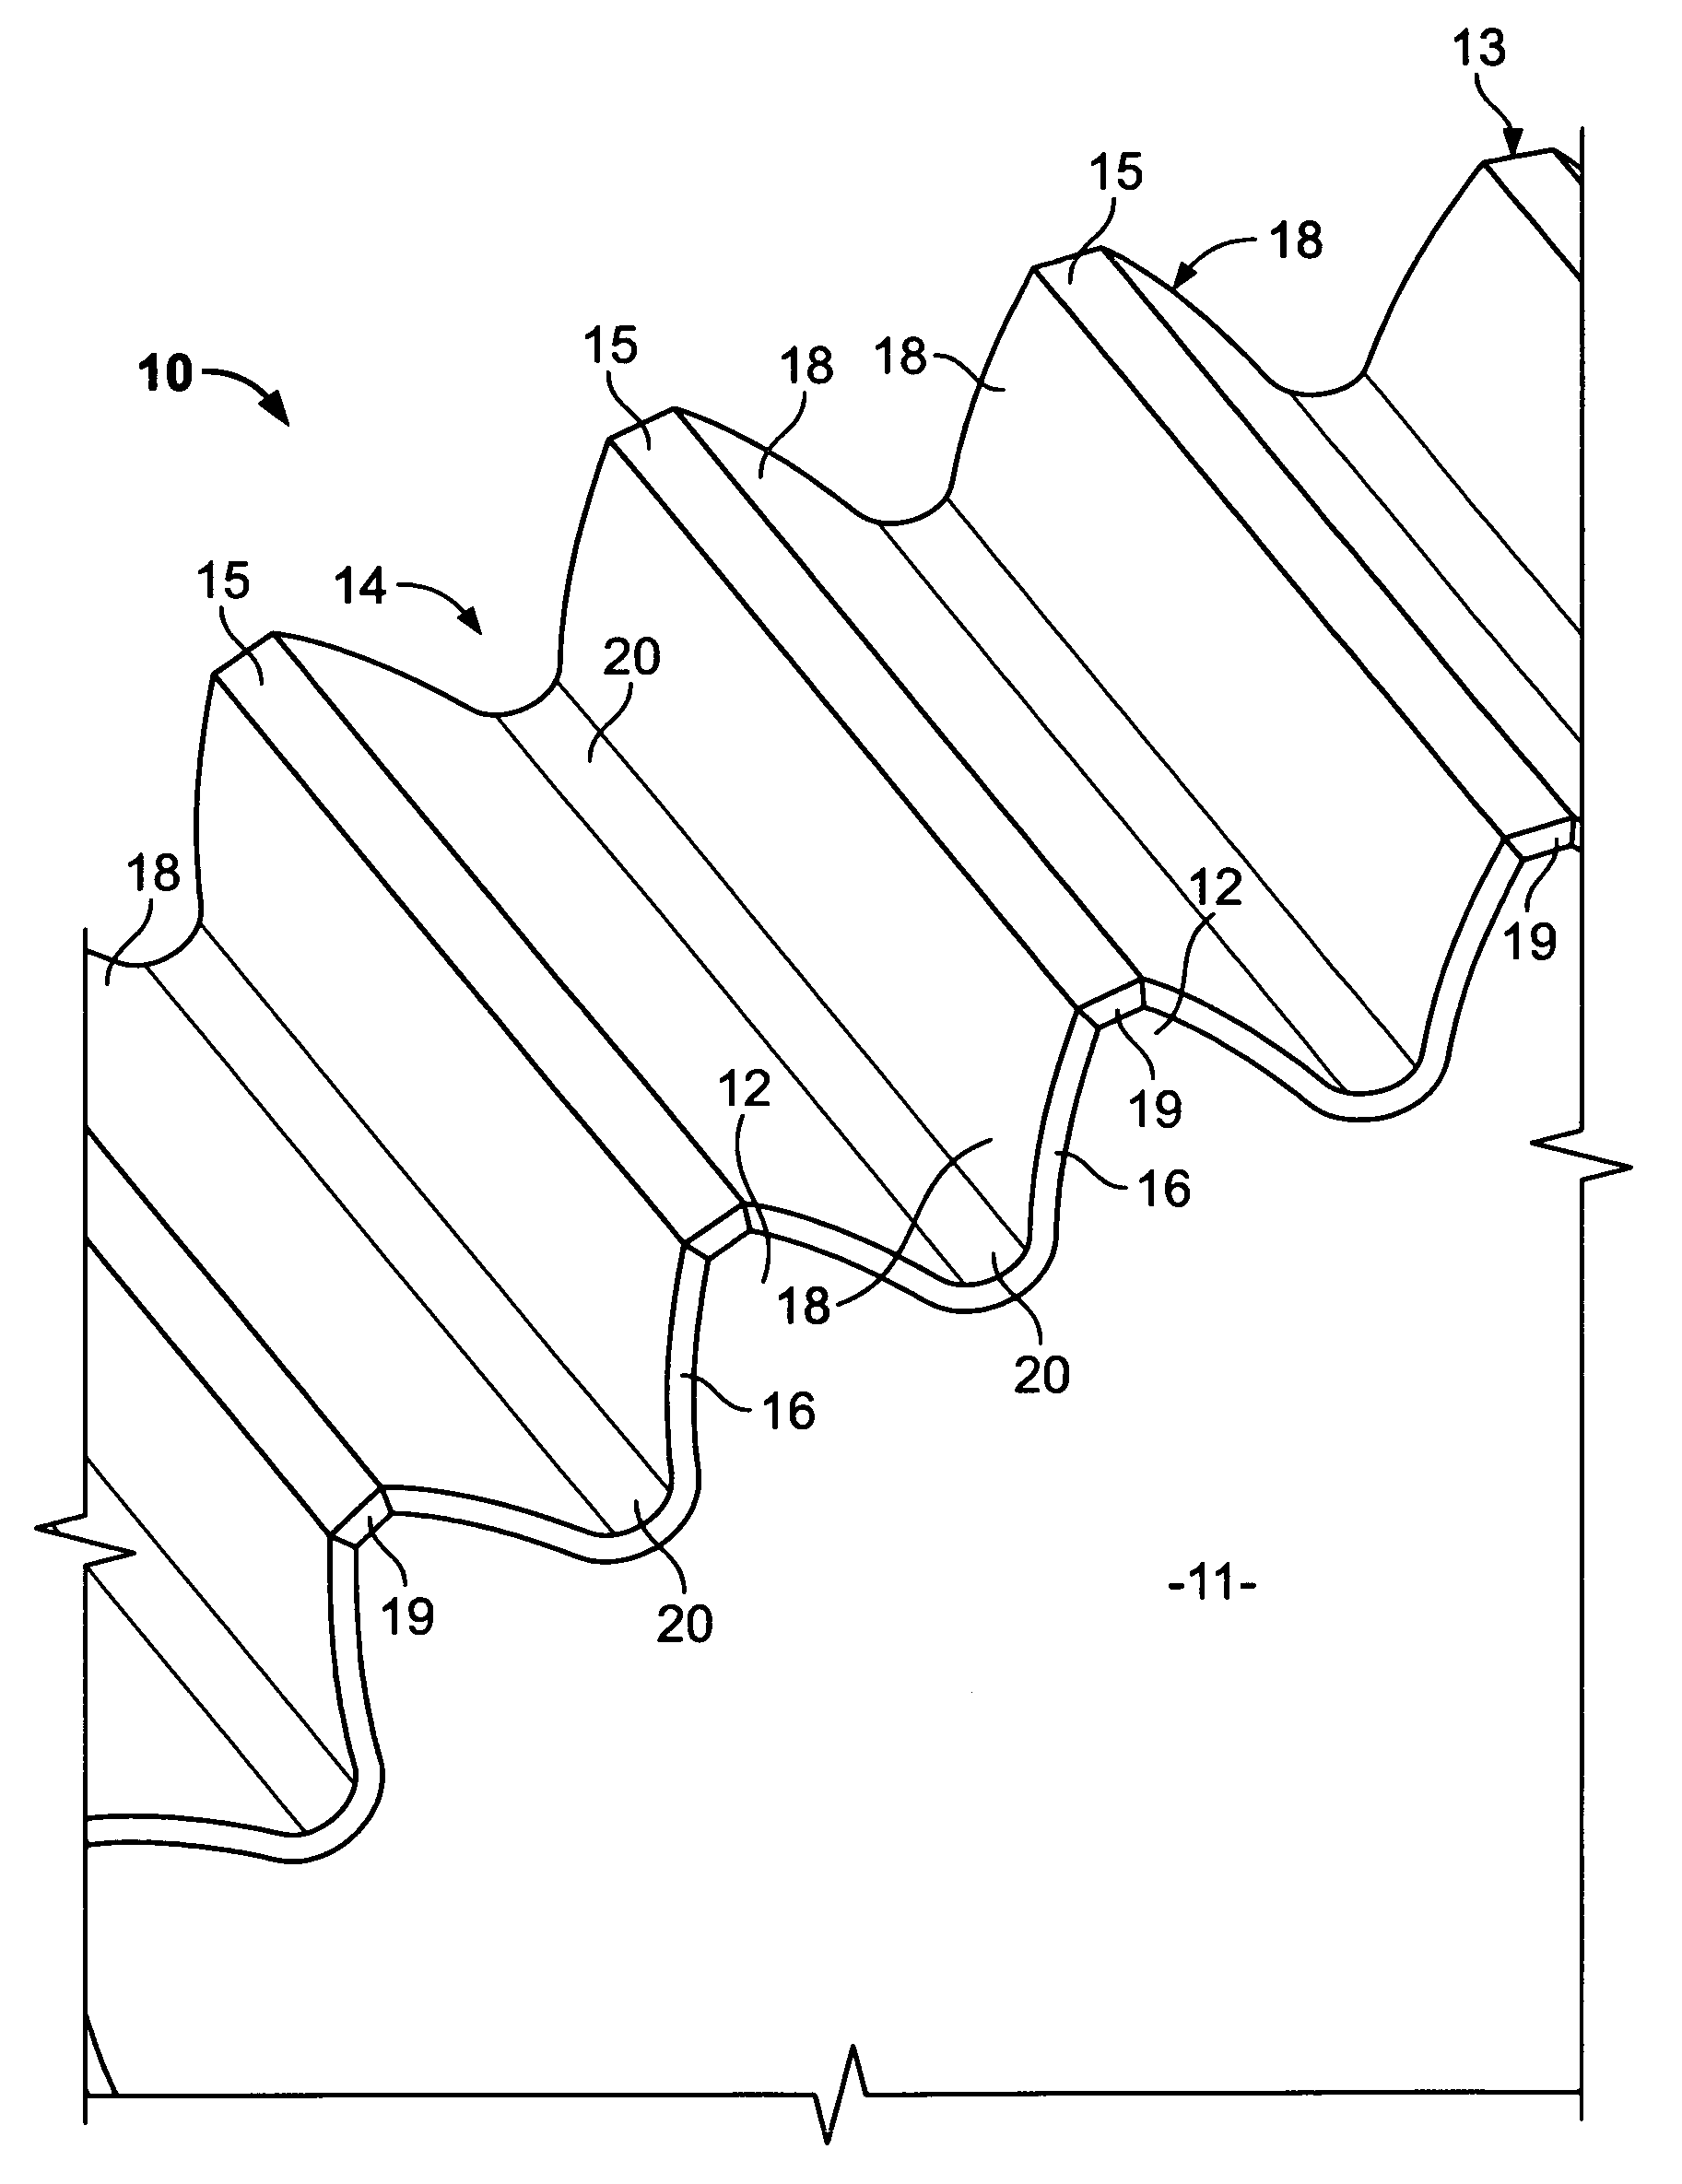 Chamfering cutting tool or grinding wheel and method of making and use thereof